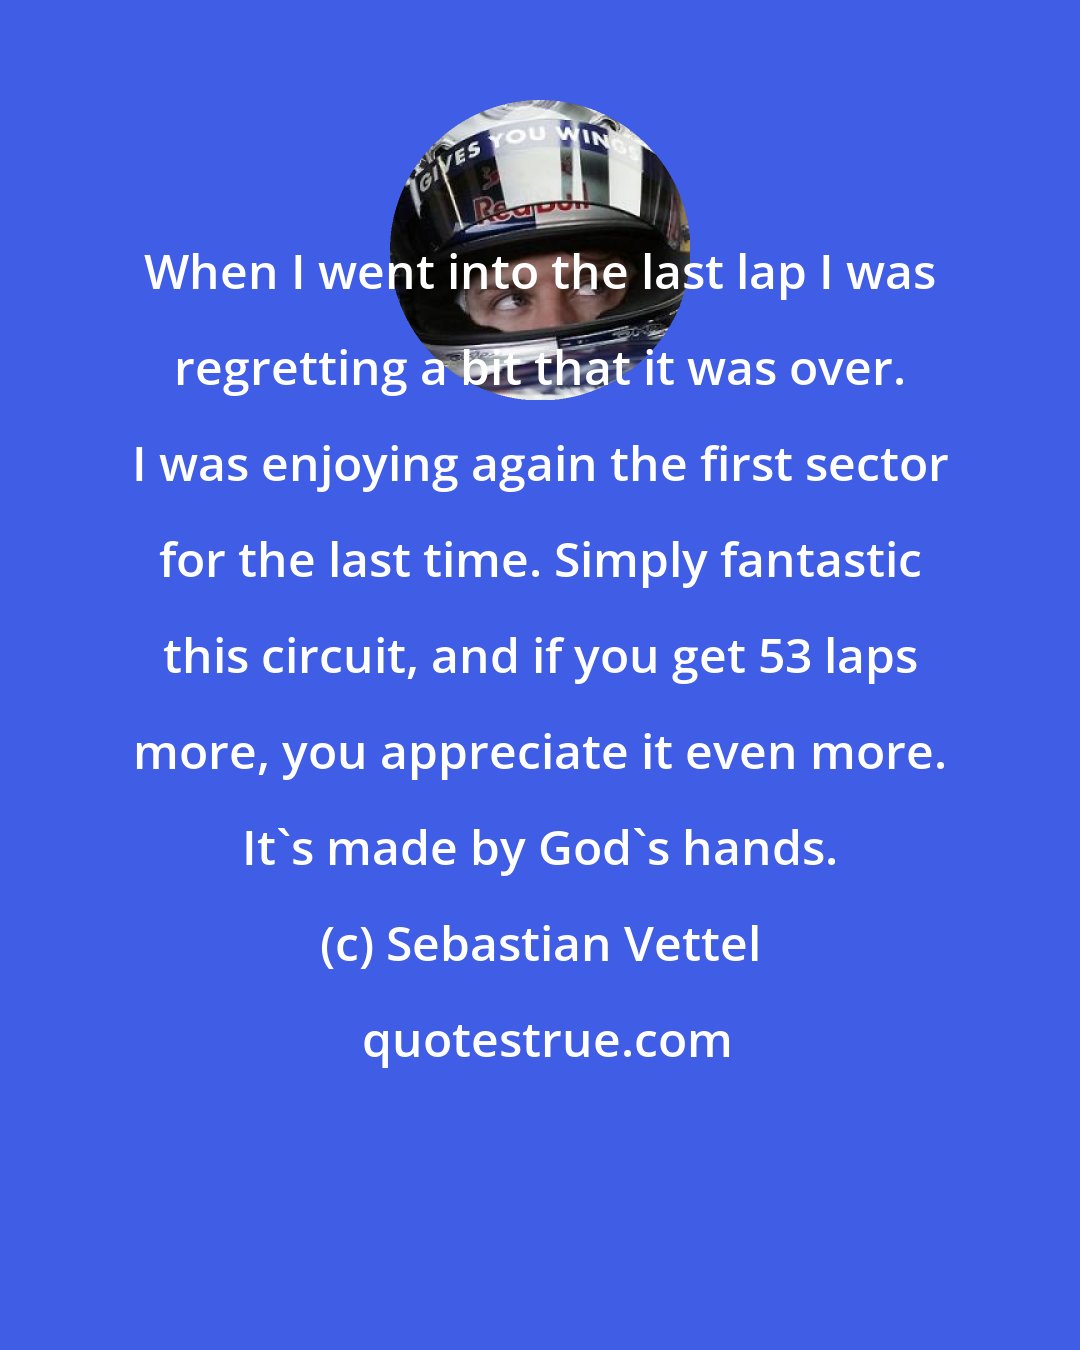 Sebastian Vettel: When I went into the last lap I was regretting a bit that it was over. I was enjoying again the first sector for the last time. Simply fantastic this circuit, and if you get 53 laps more, you appreciate it even more. It's made by God's hands.